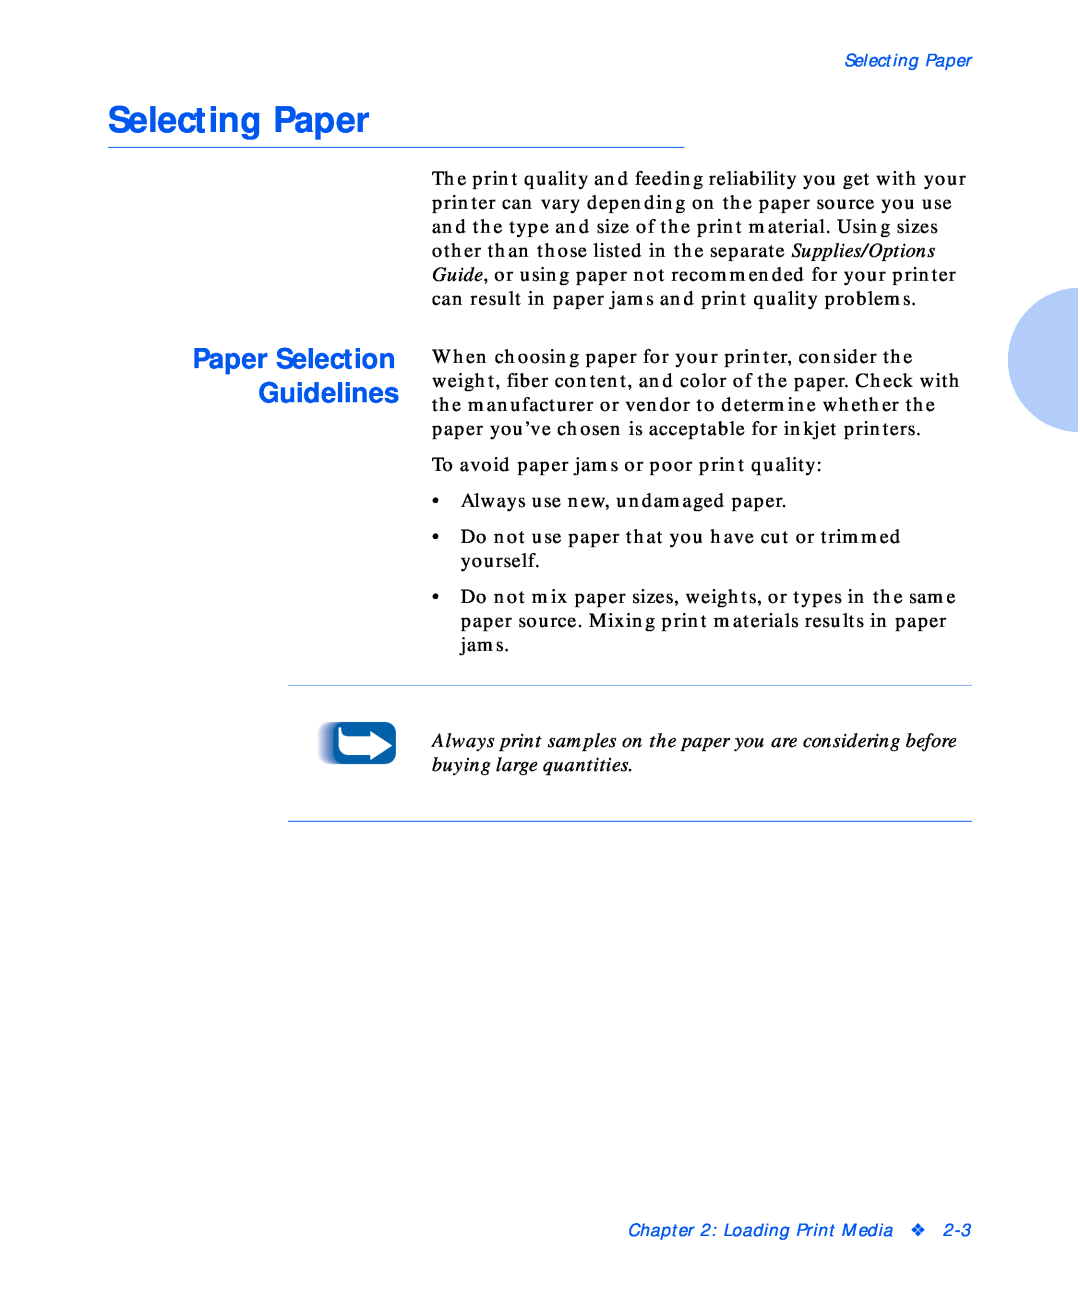 Xerox NC20 manual Selecting Paper, Paper Selection Guidelines 